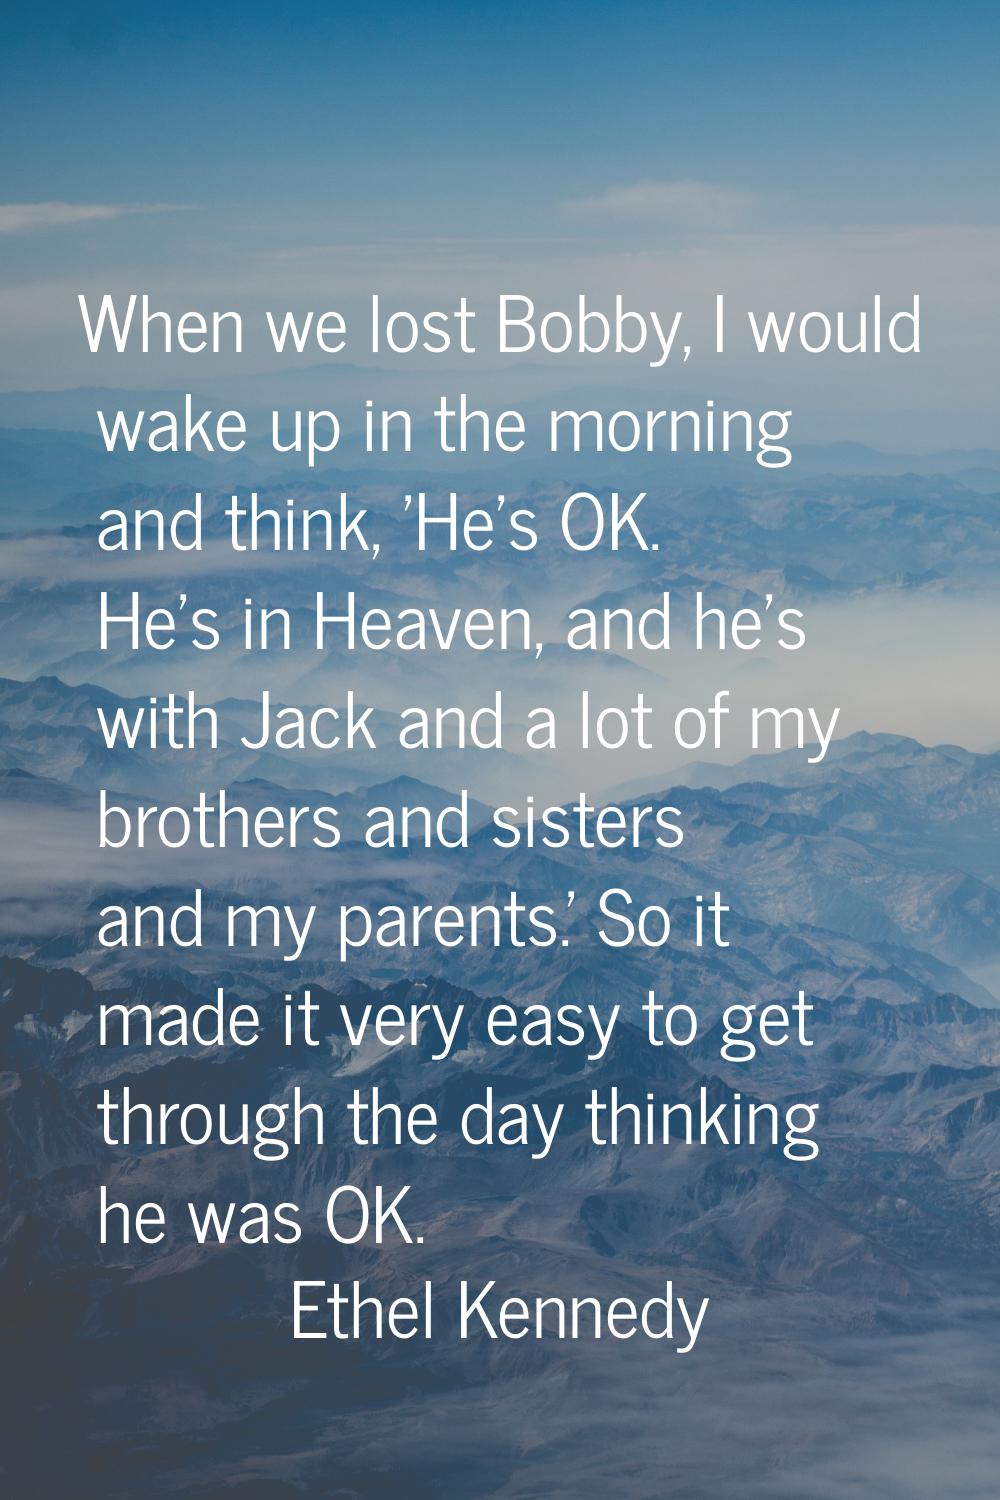 When we lost Bobby, I would wake up in the morning and think, 'He's OK. He's in Heaven, and he's wi